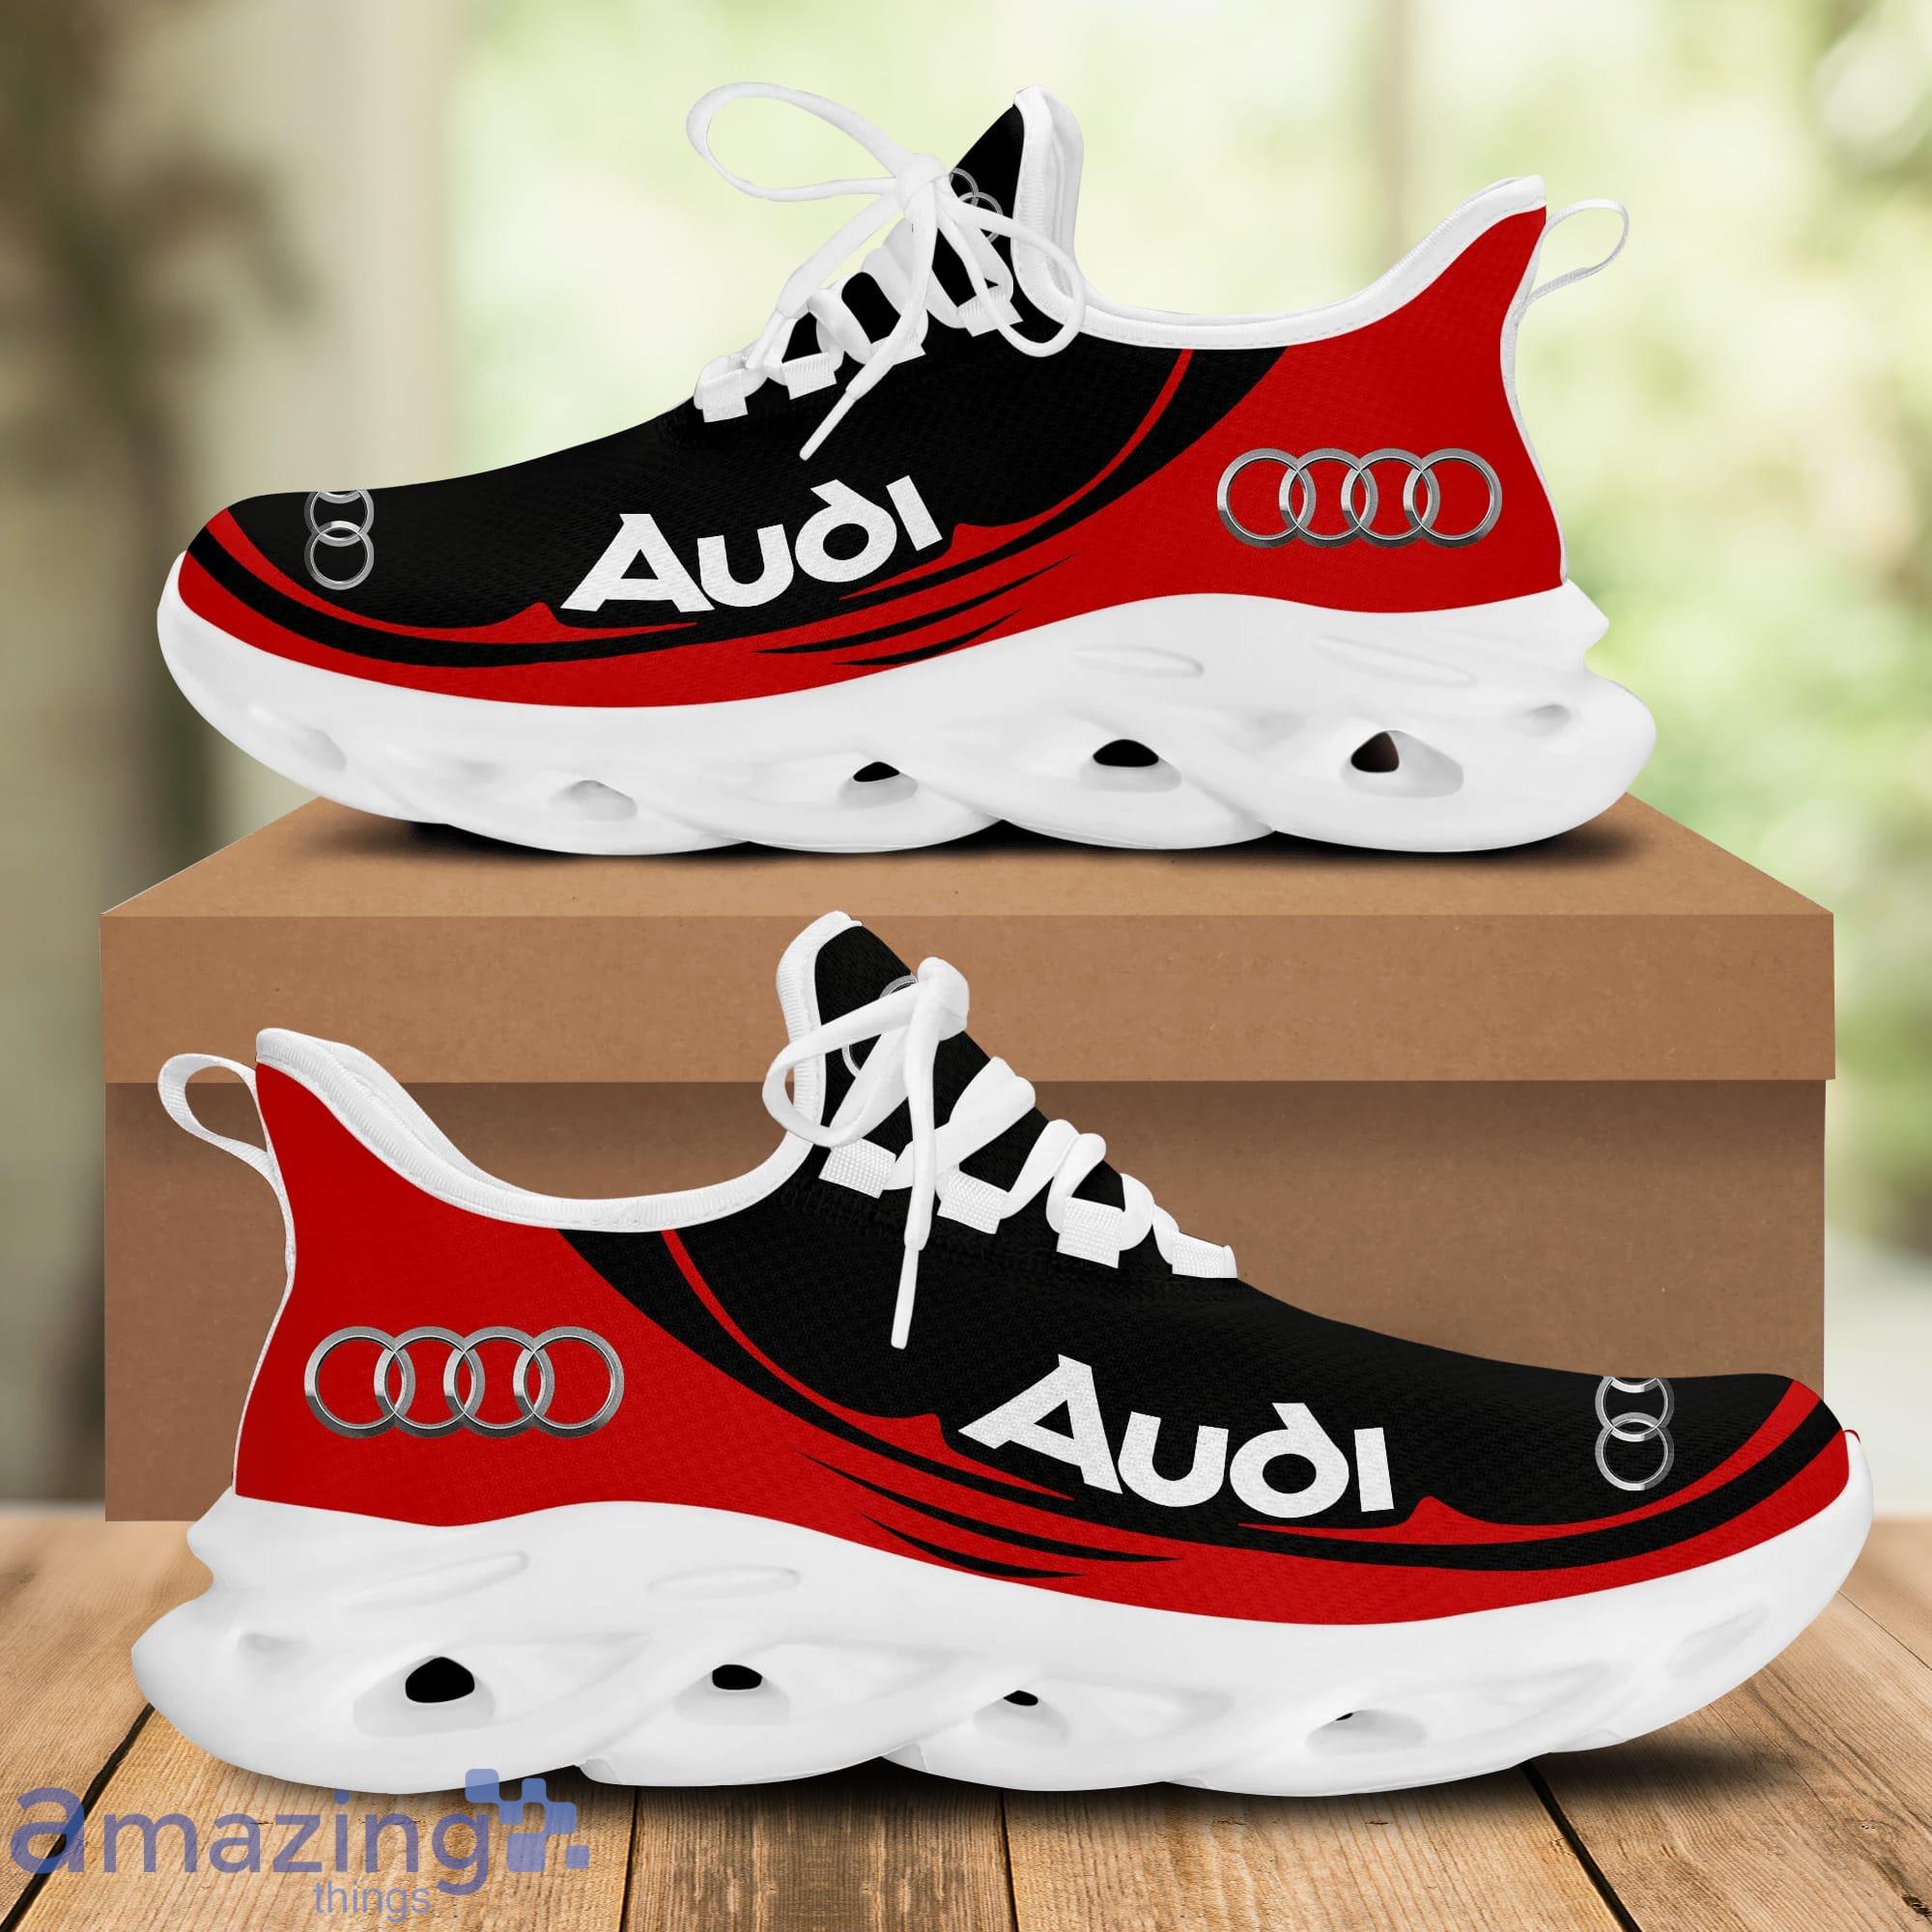 Schuster Women Sports Shoes, Model Name/Number: Audi at best price